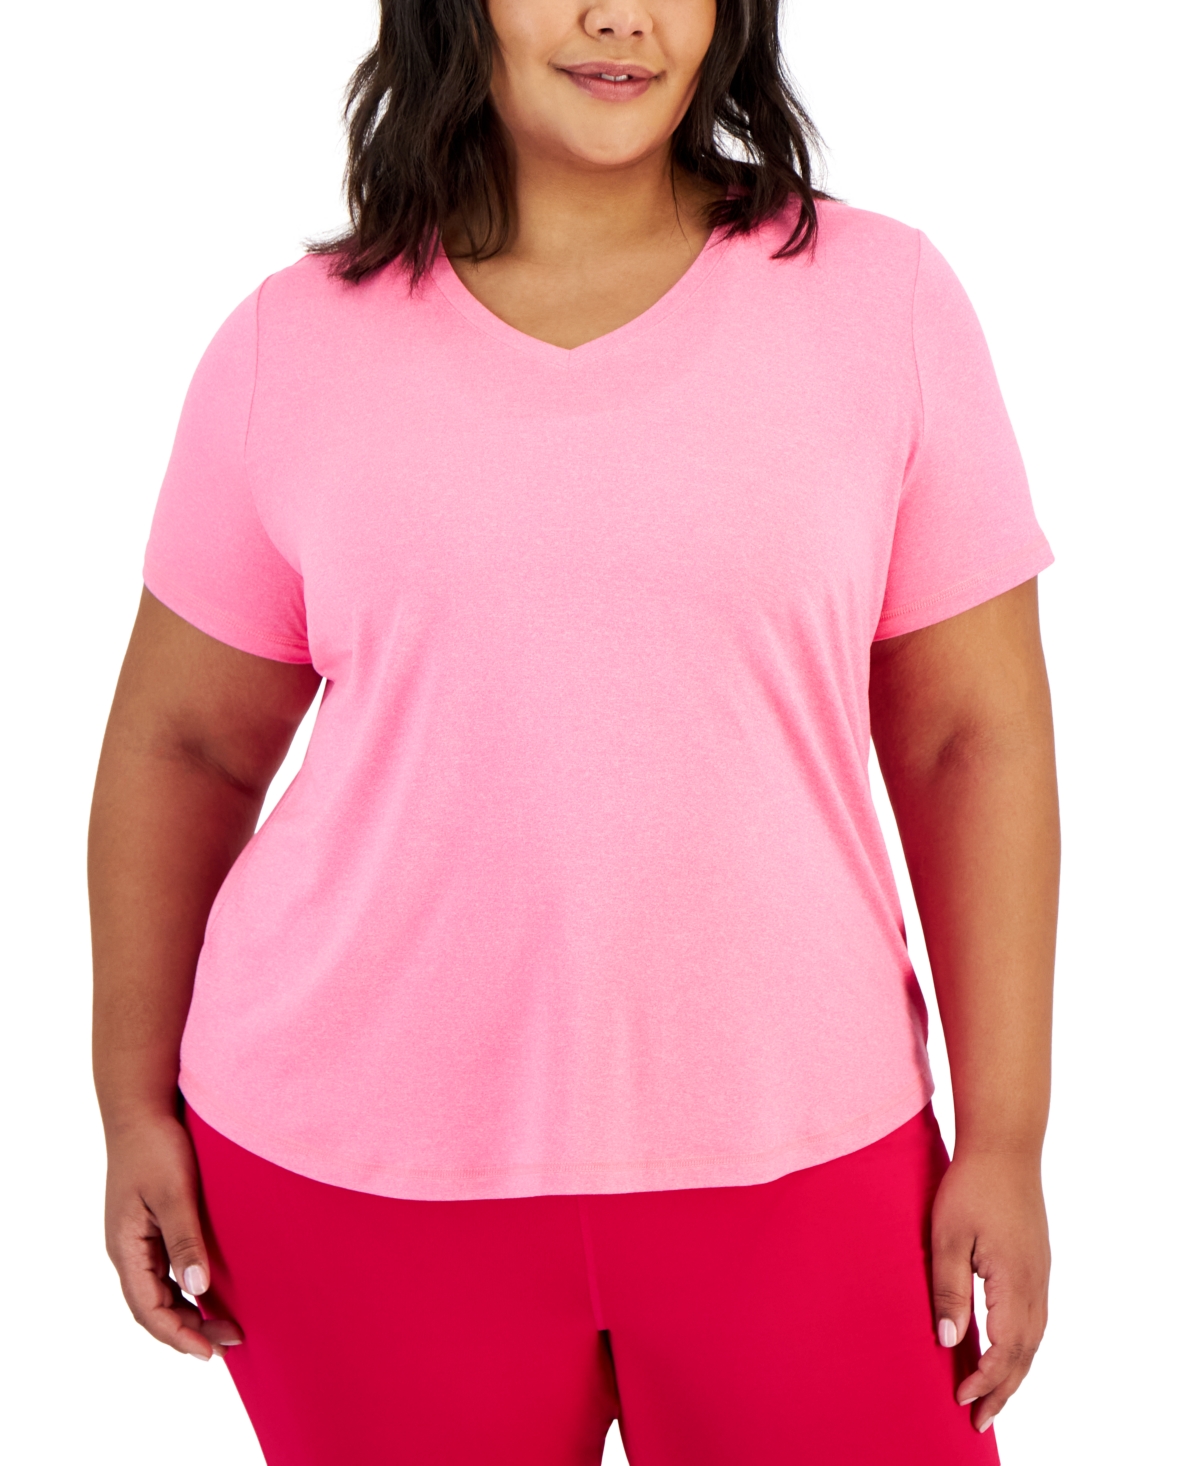 Plus Size 3-Pk. Solid Short-Sleeve Top, Created for Macy's - Mp/db/bw Combo